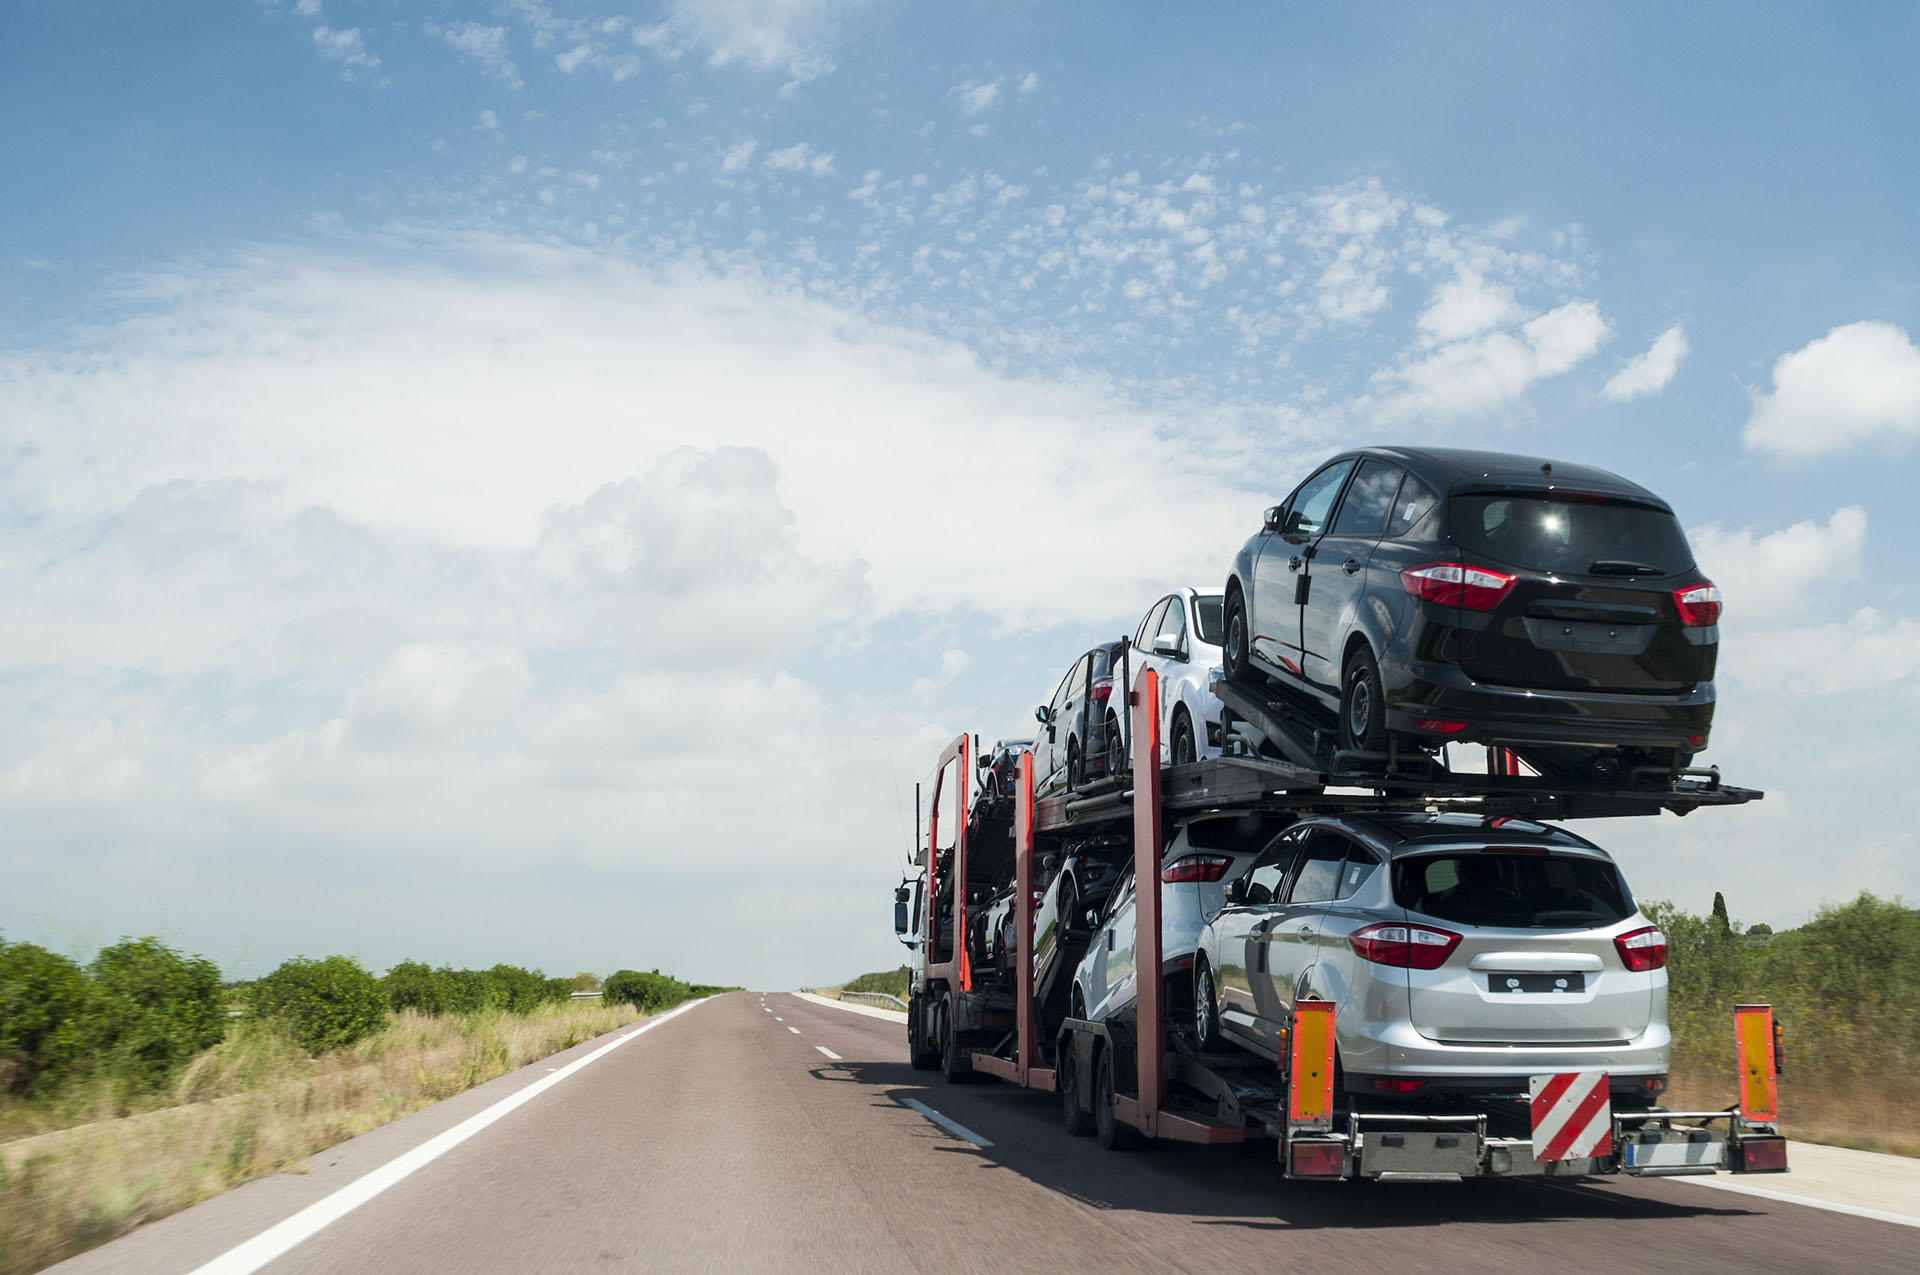  Auto Transport Services in Houston TX